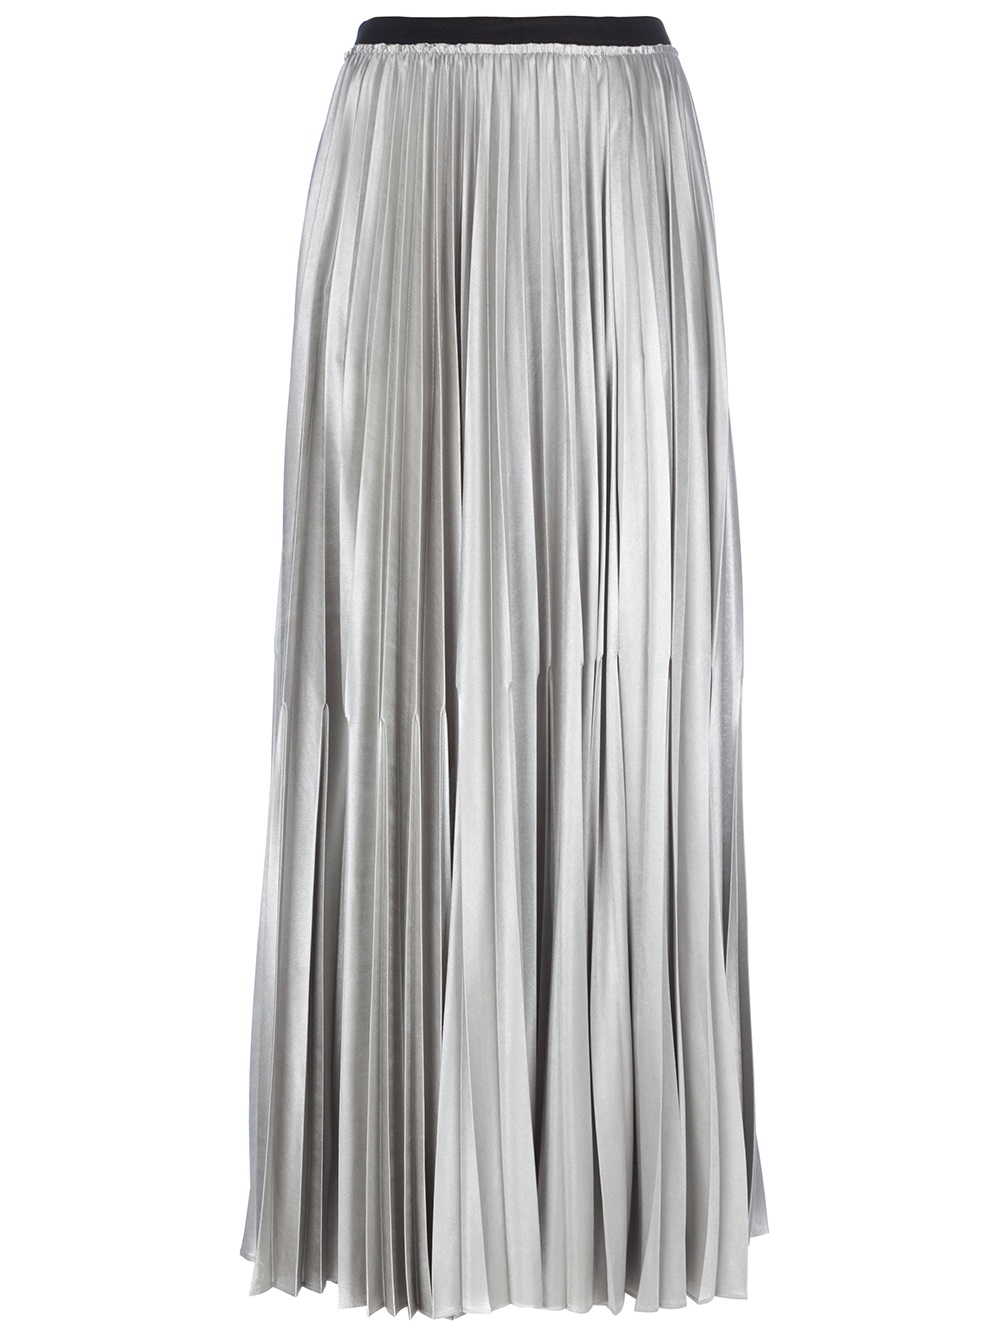 Enza Costa Pleated Maxi Skirt in Silver | Lyst